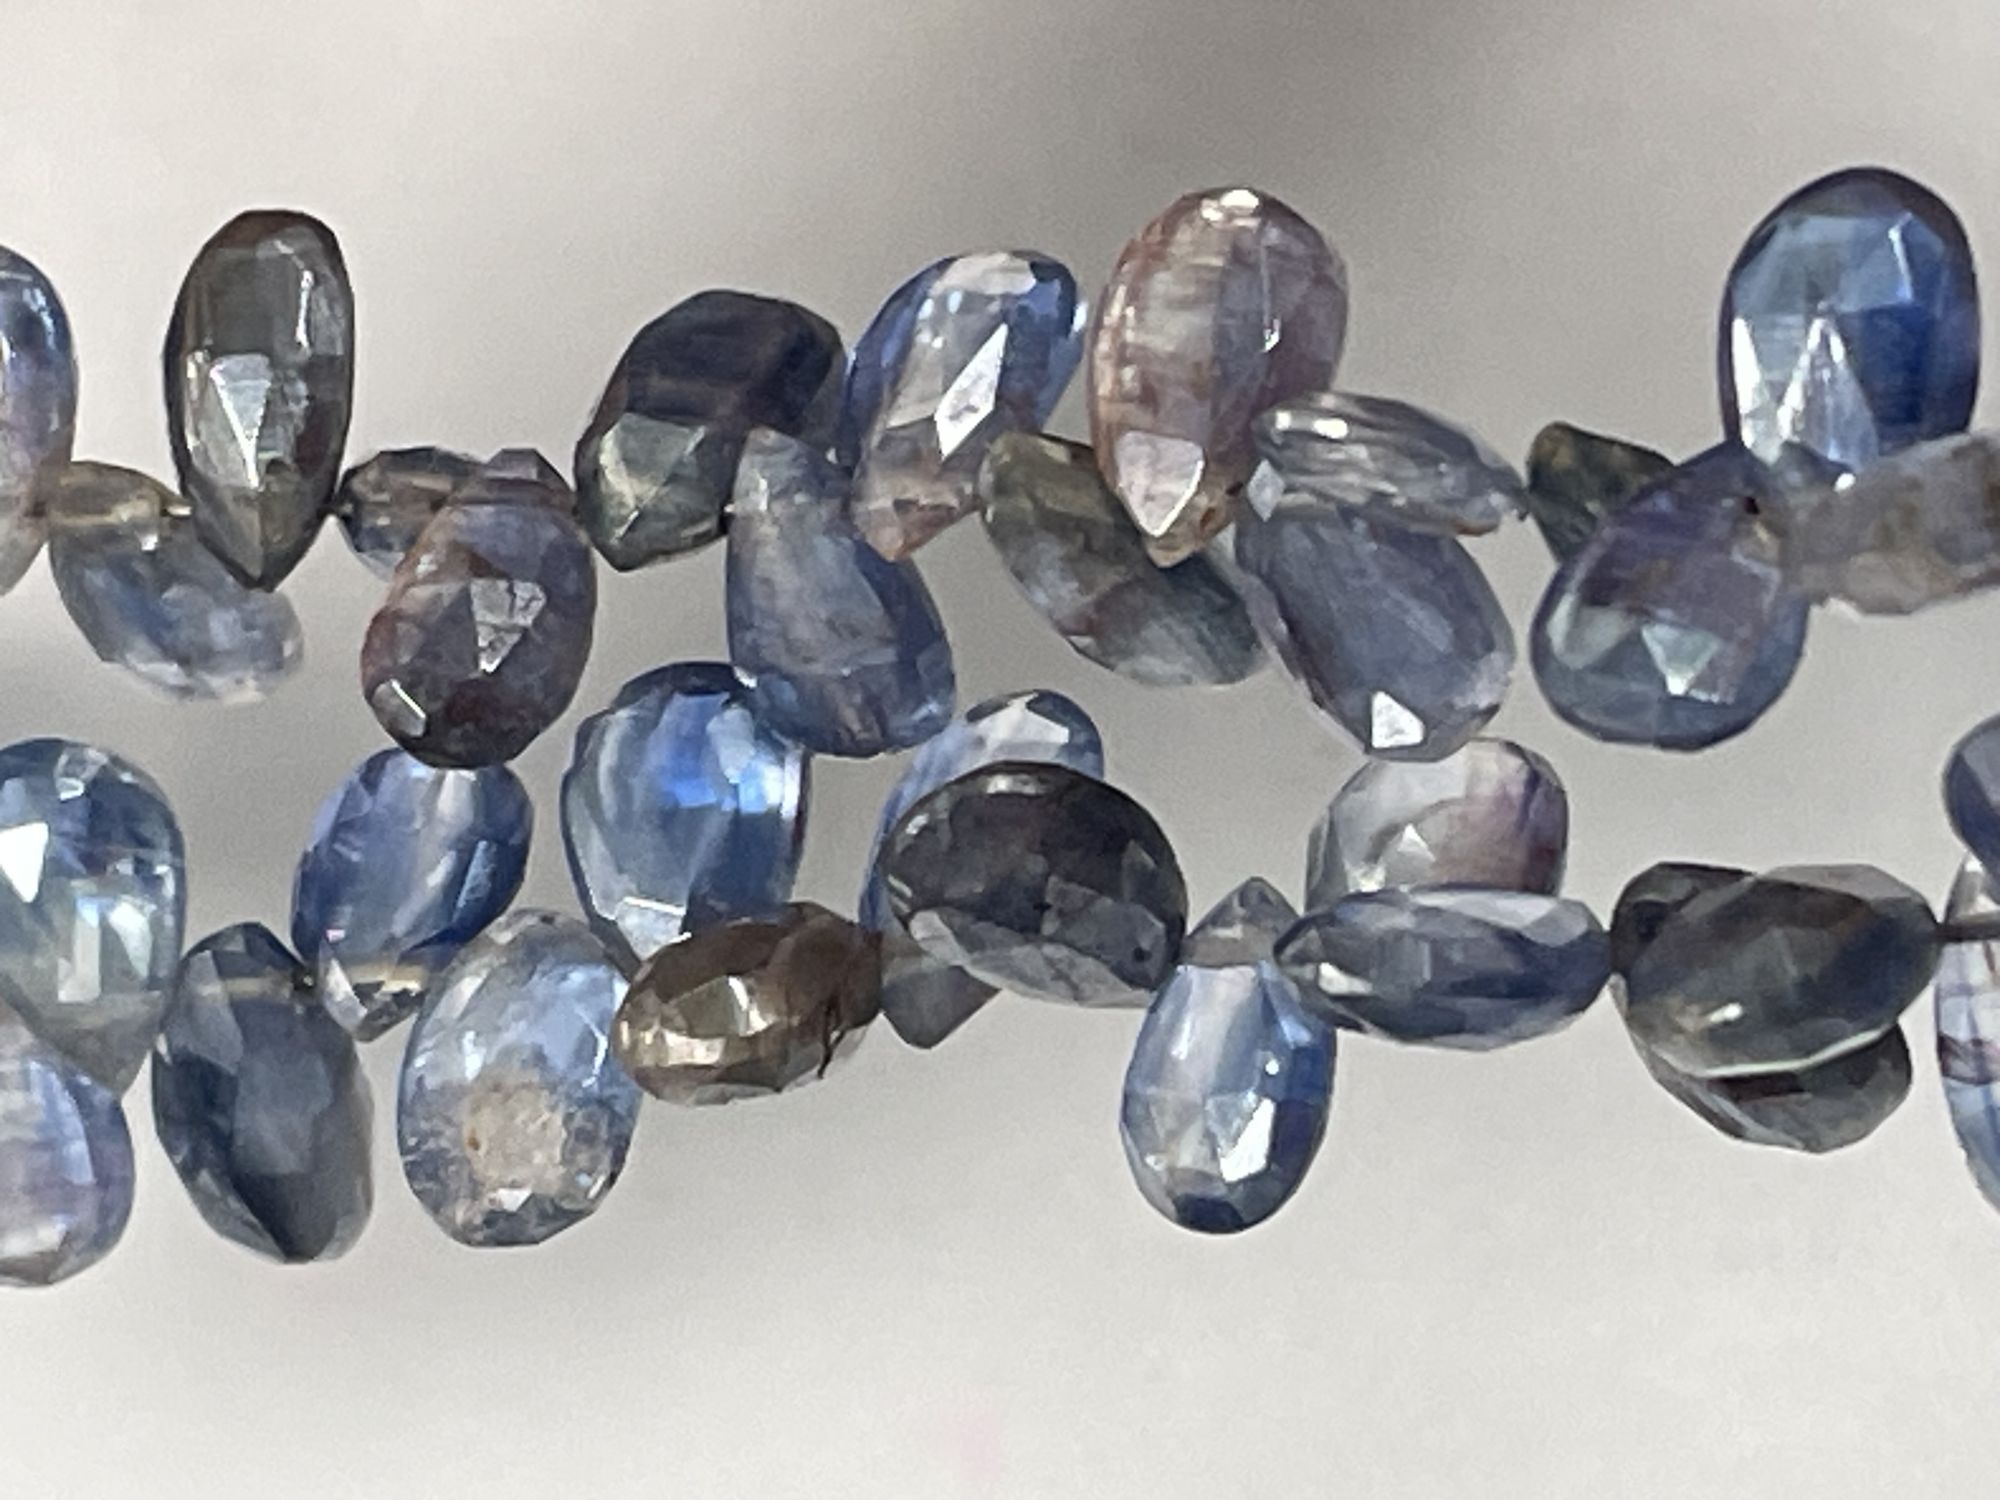 Coated Blue Kyanite Pear Faceted